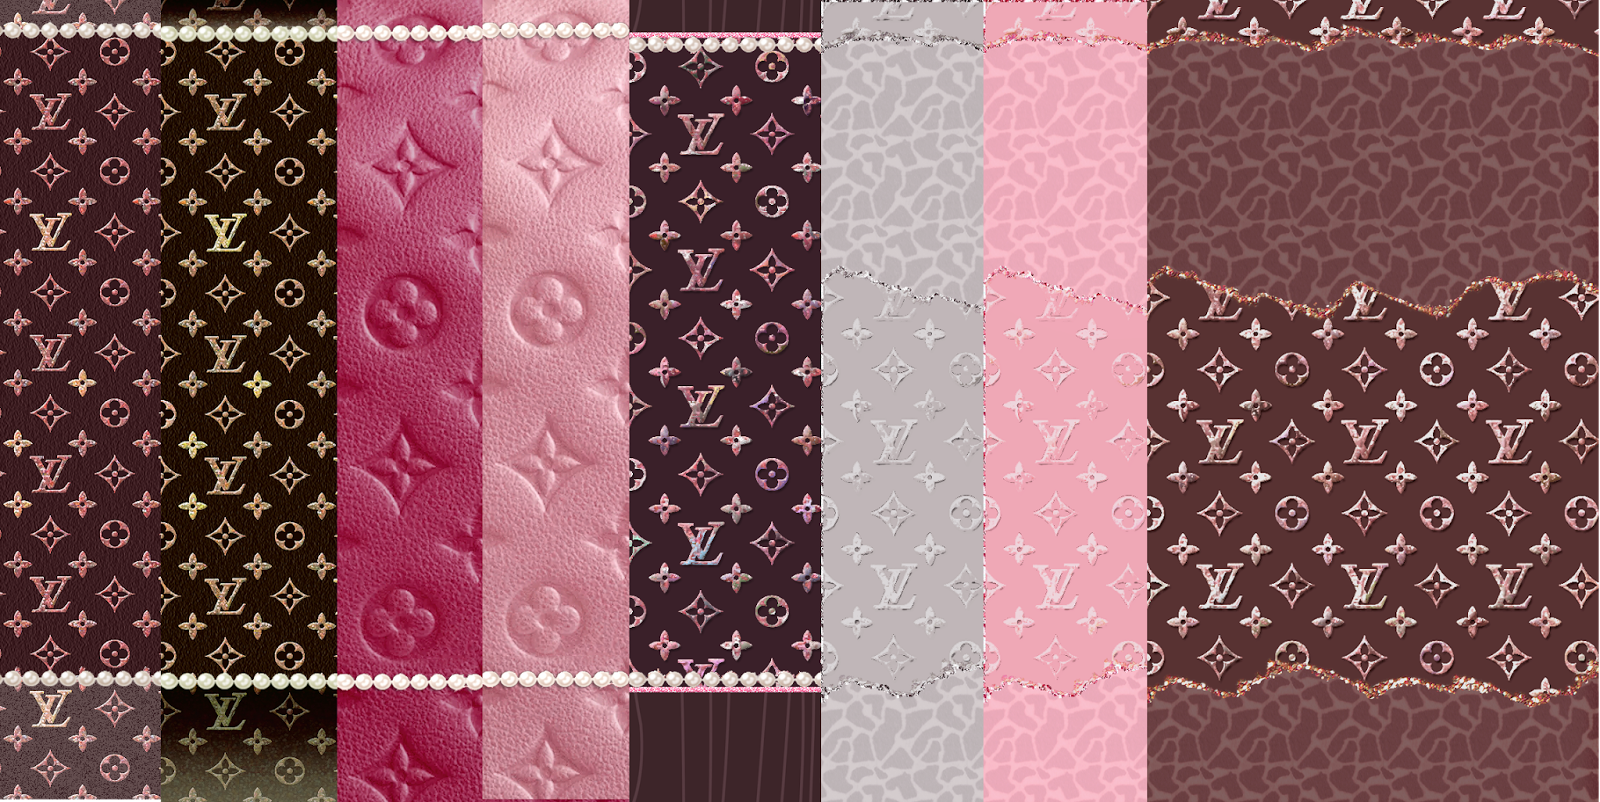 LOve Pink~: I Love LV Wallpapers pack(15)